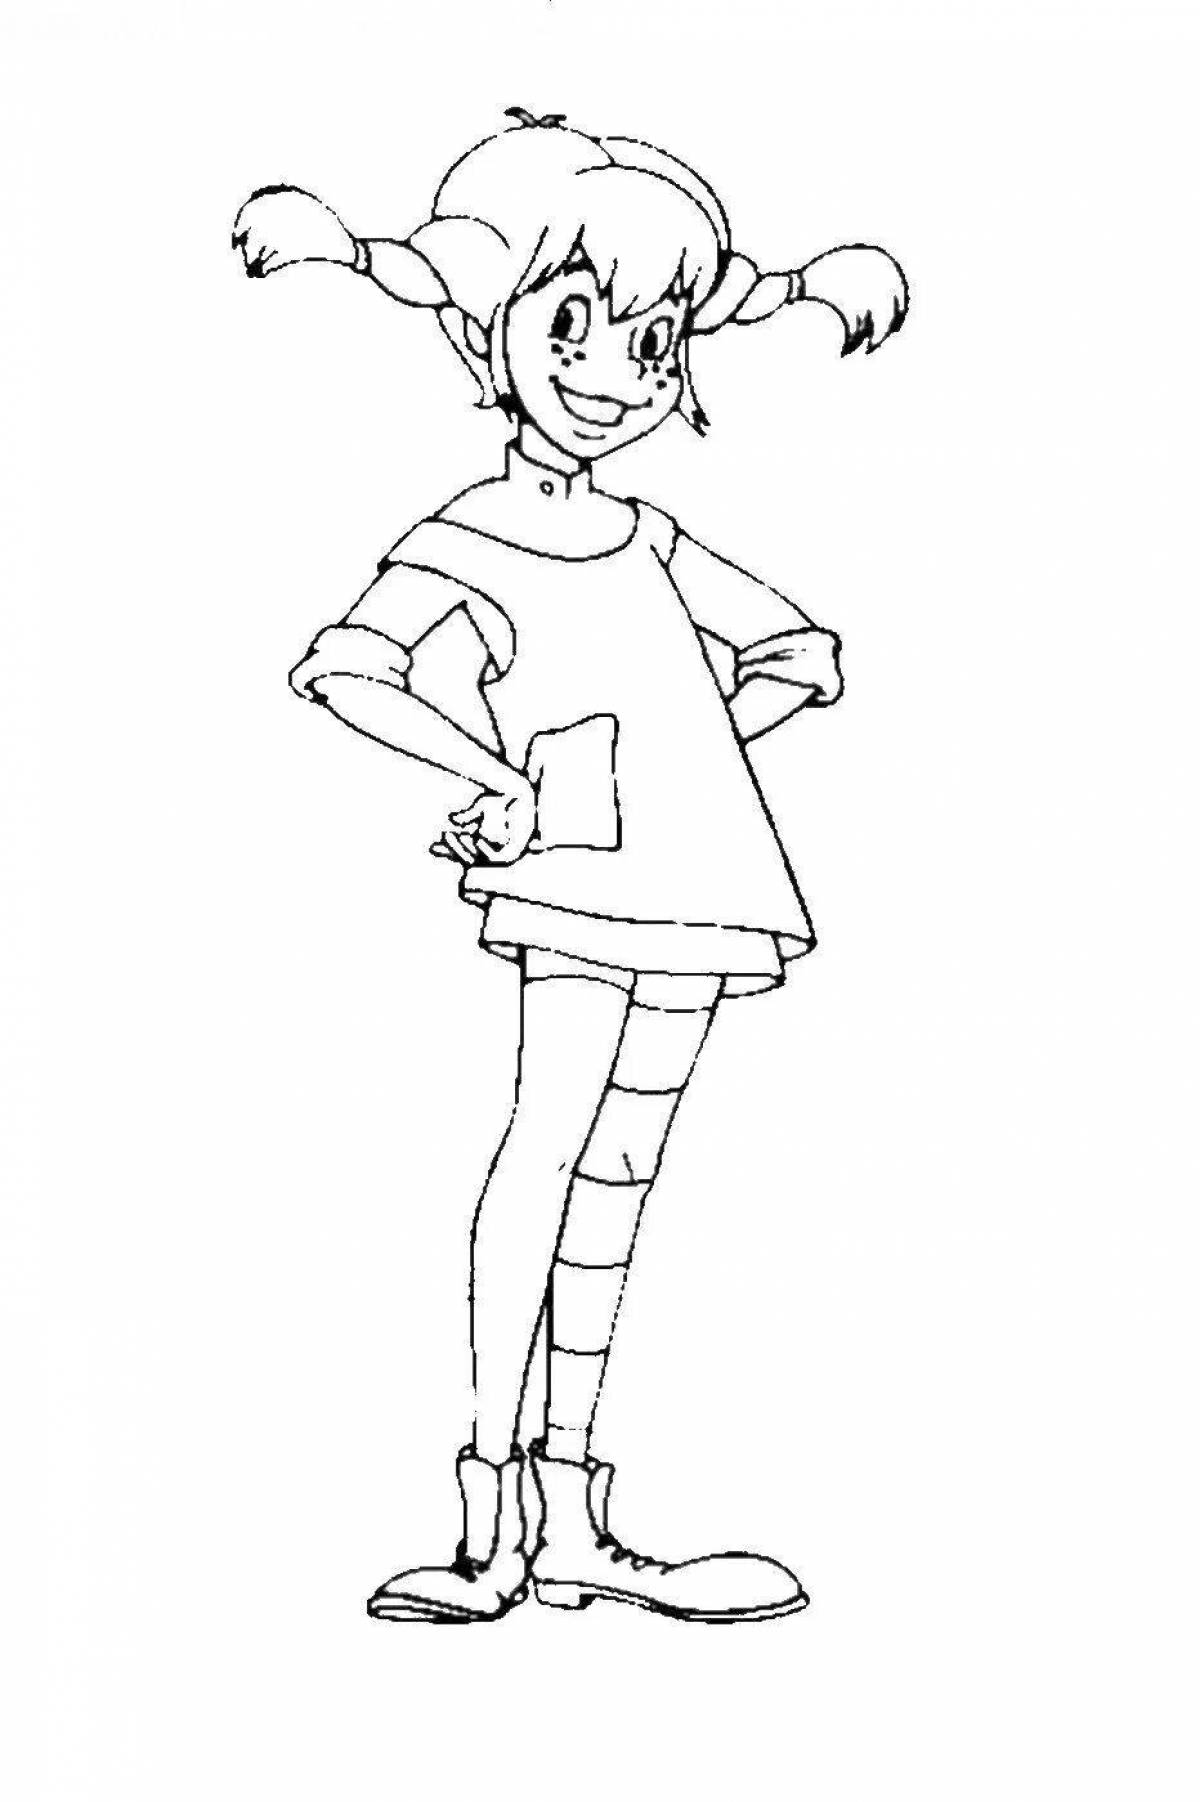 Adorable pippi longstocking coloring page